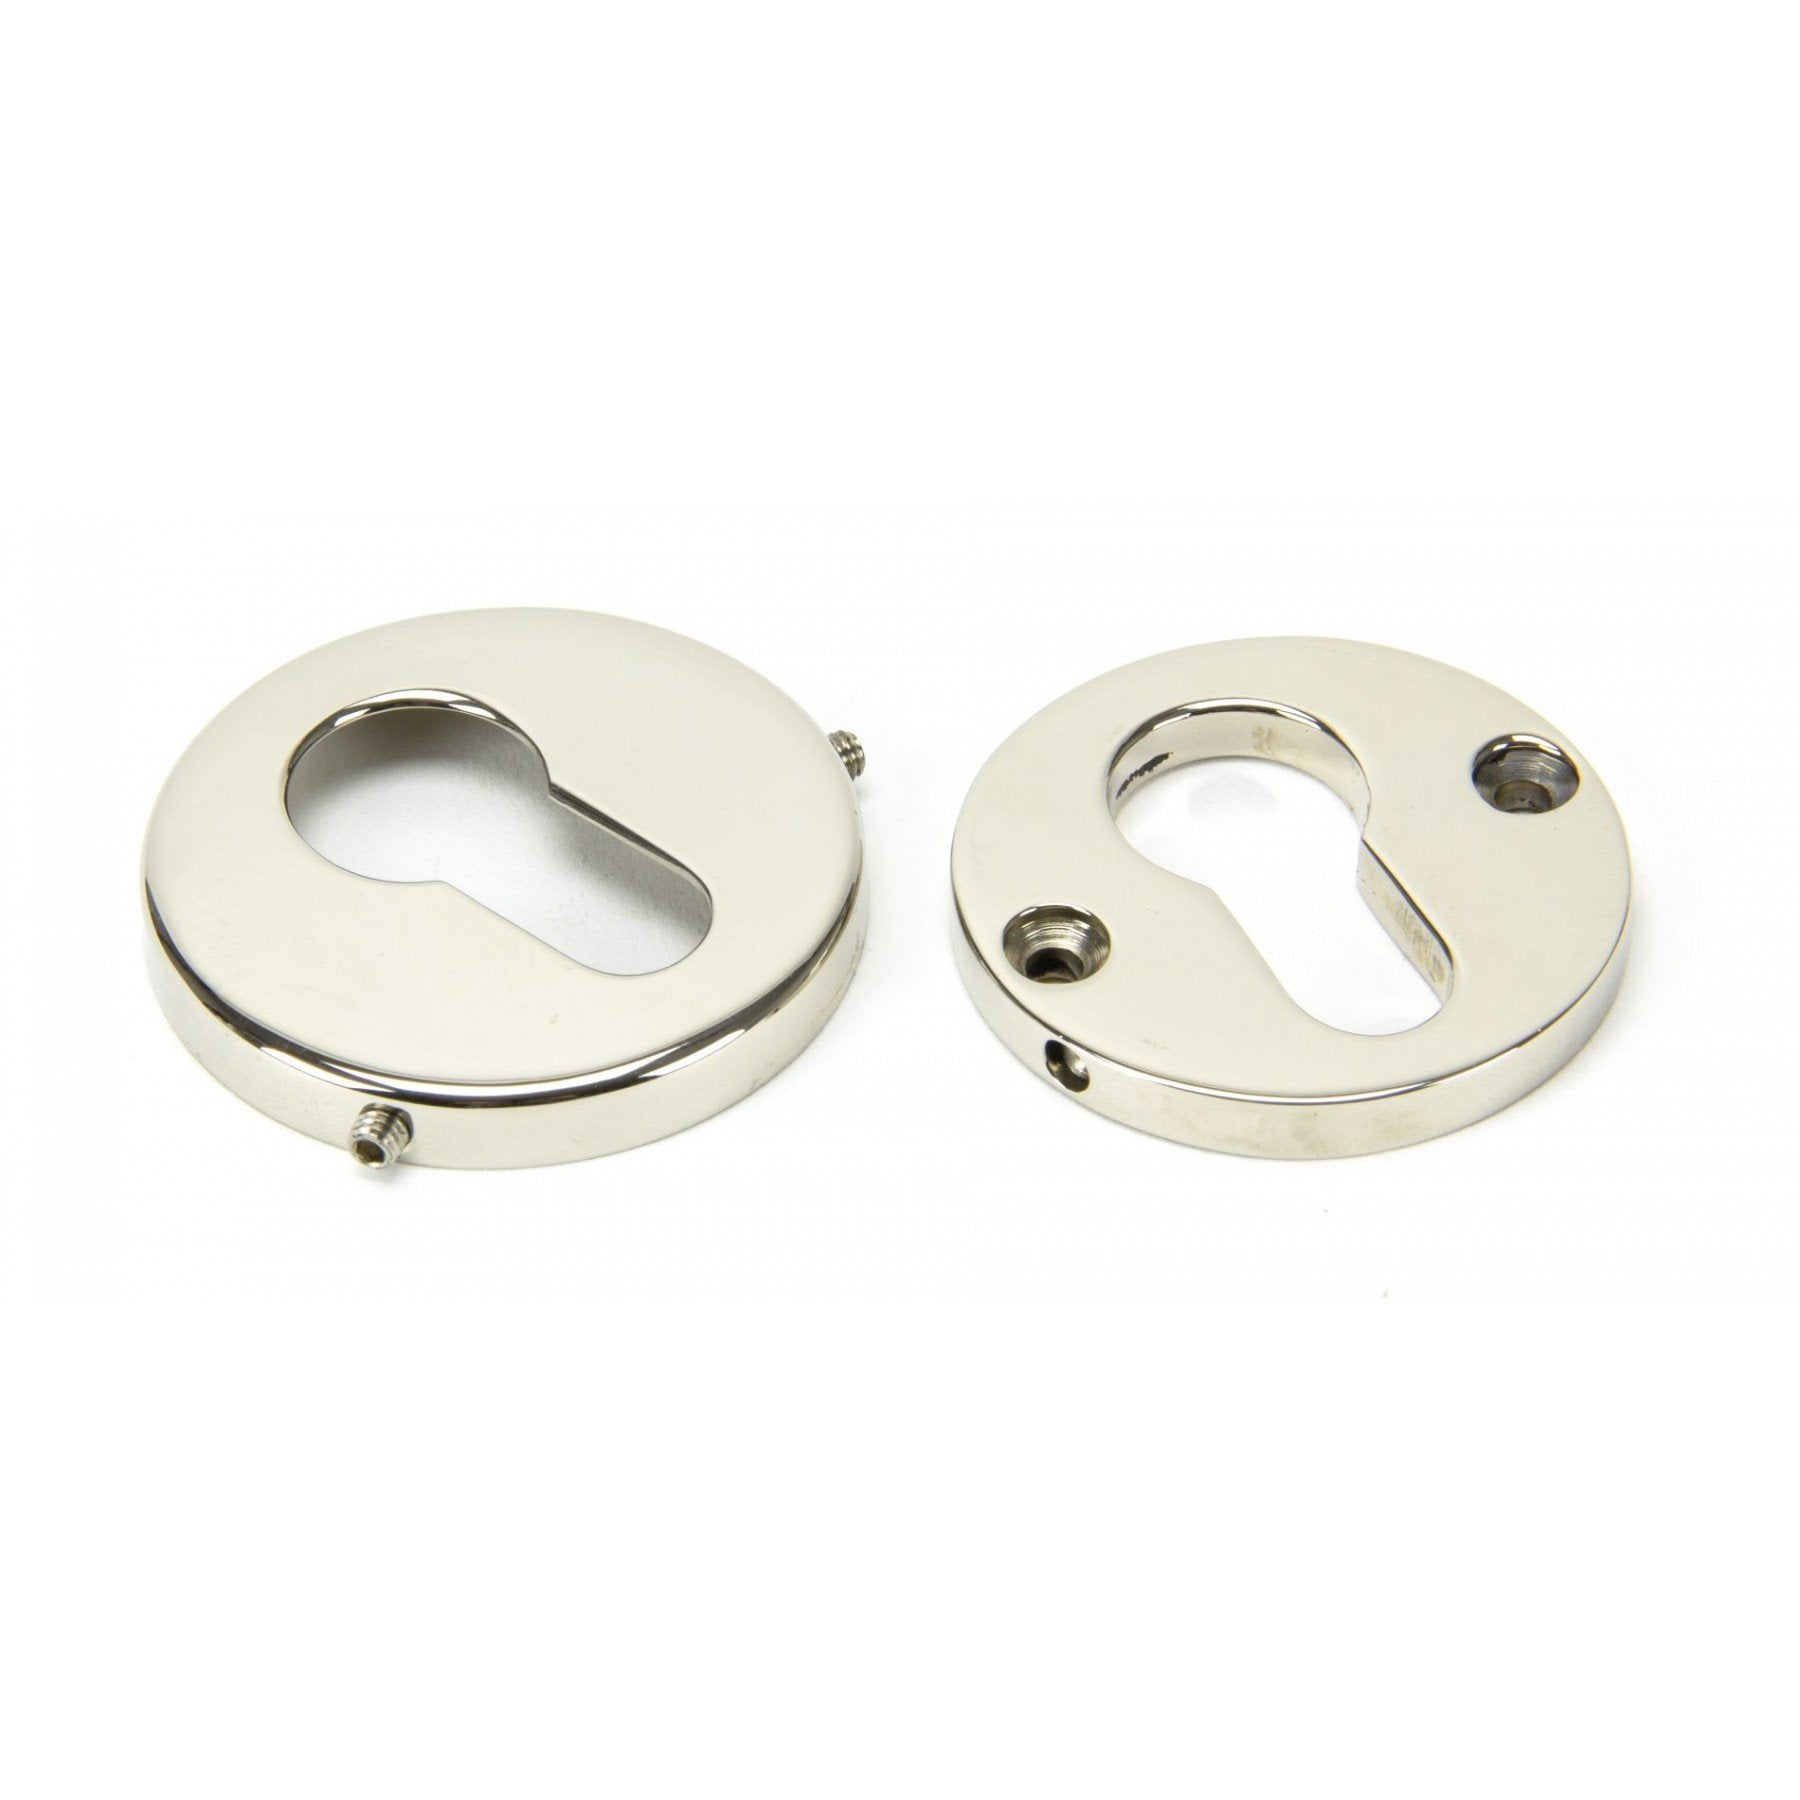 From the Anvil Polished Nickel 52mm Regency Concealed Escutcheon